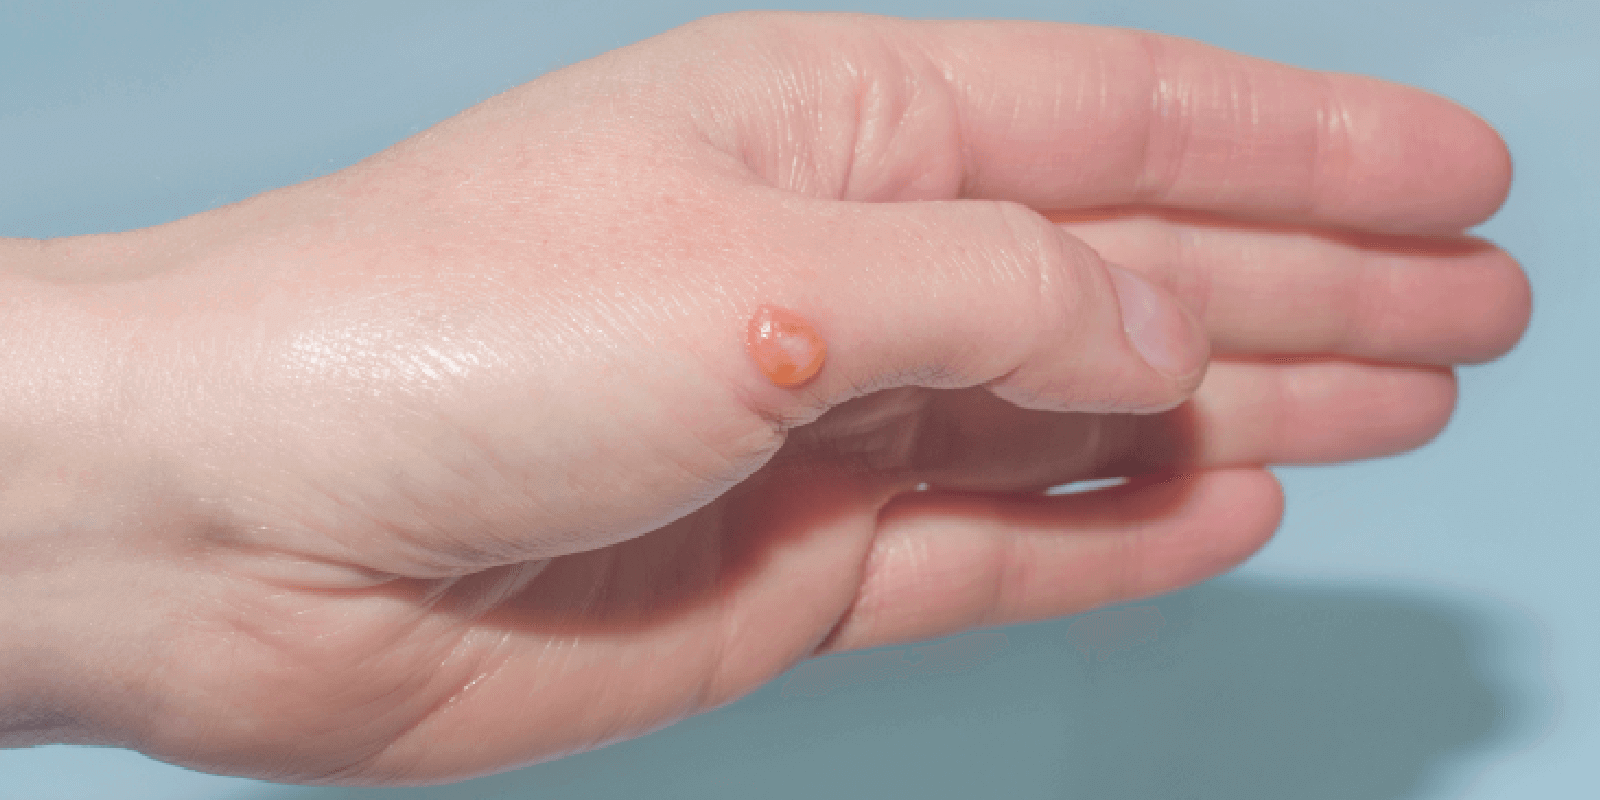 First Aid Guide: Dealing with Blisters